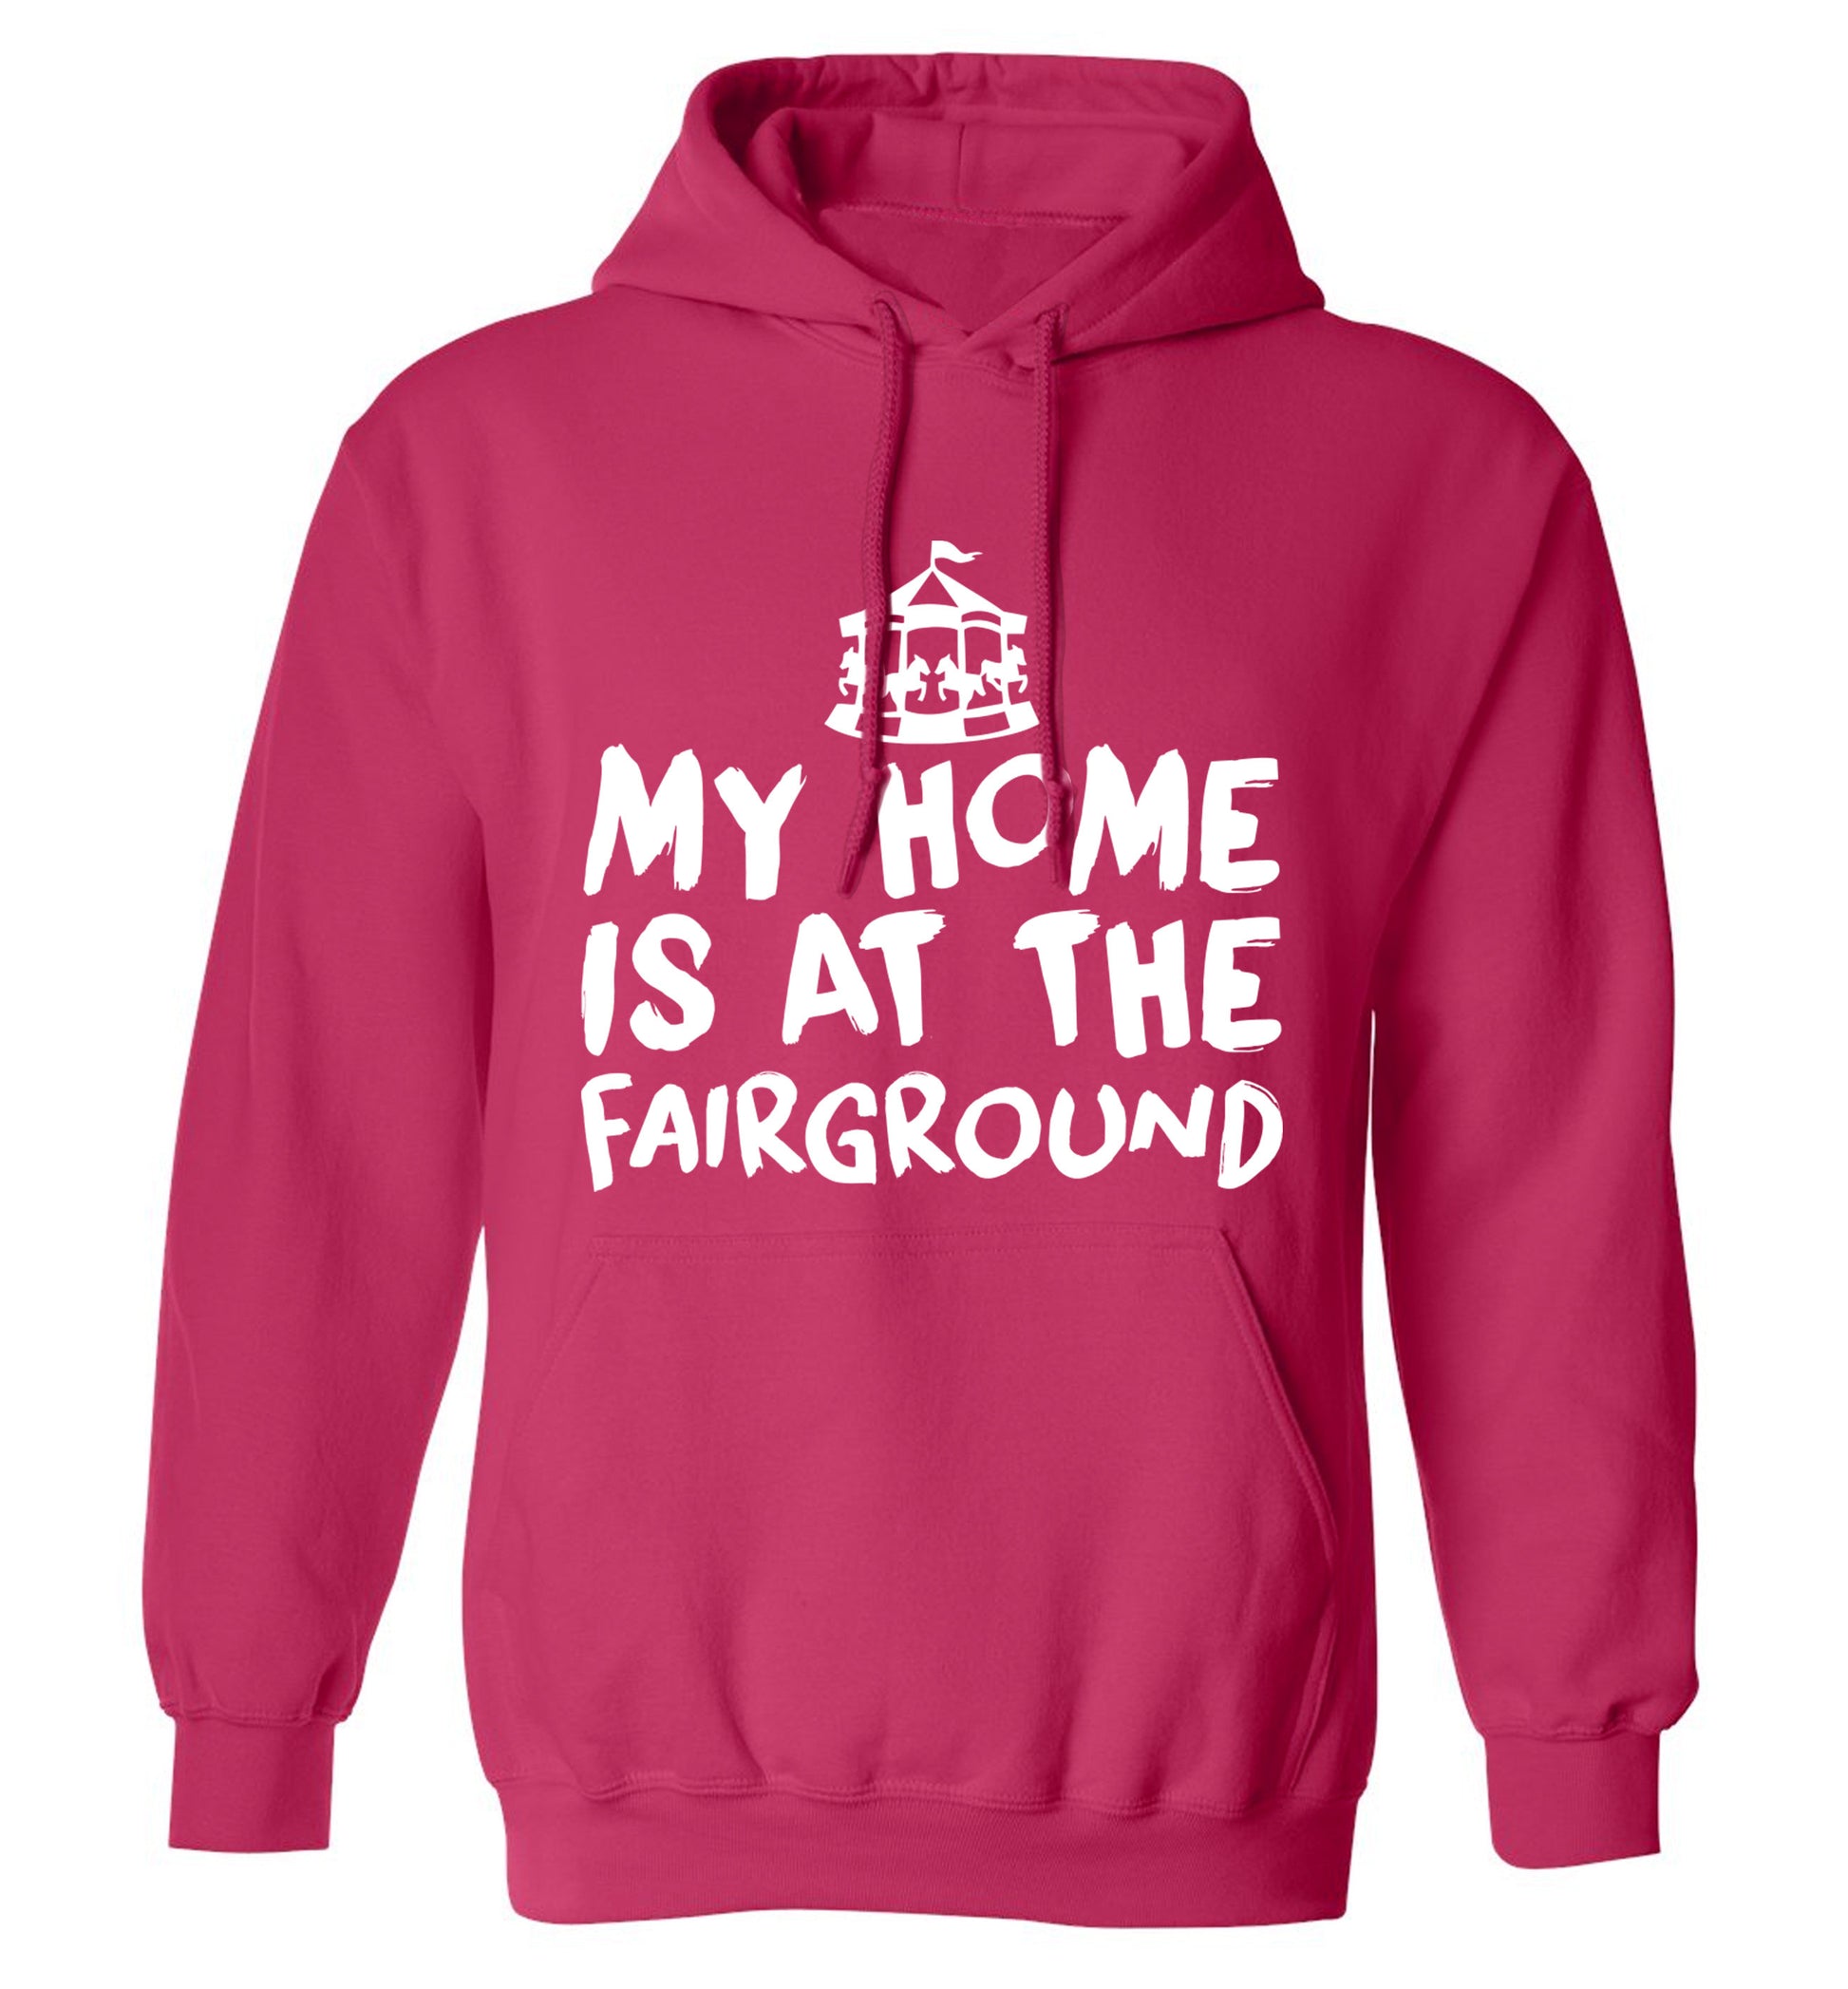 My home is at the fairground adults unisex pink hoodie 2XL